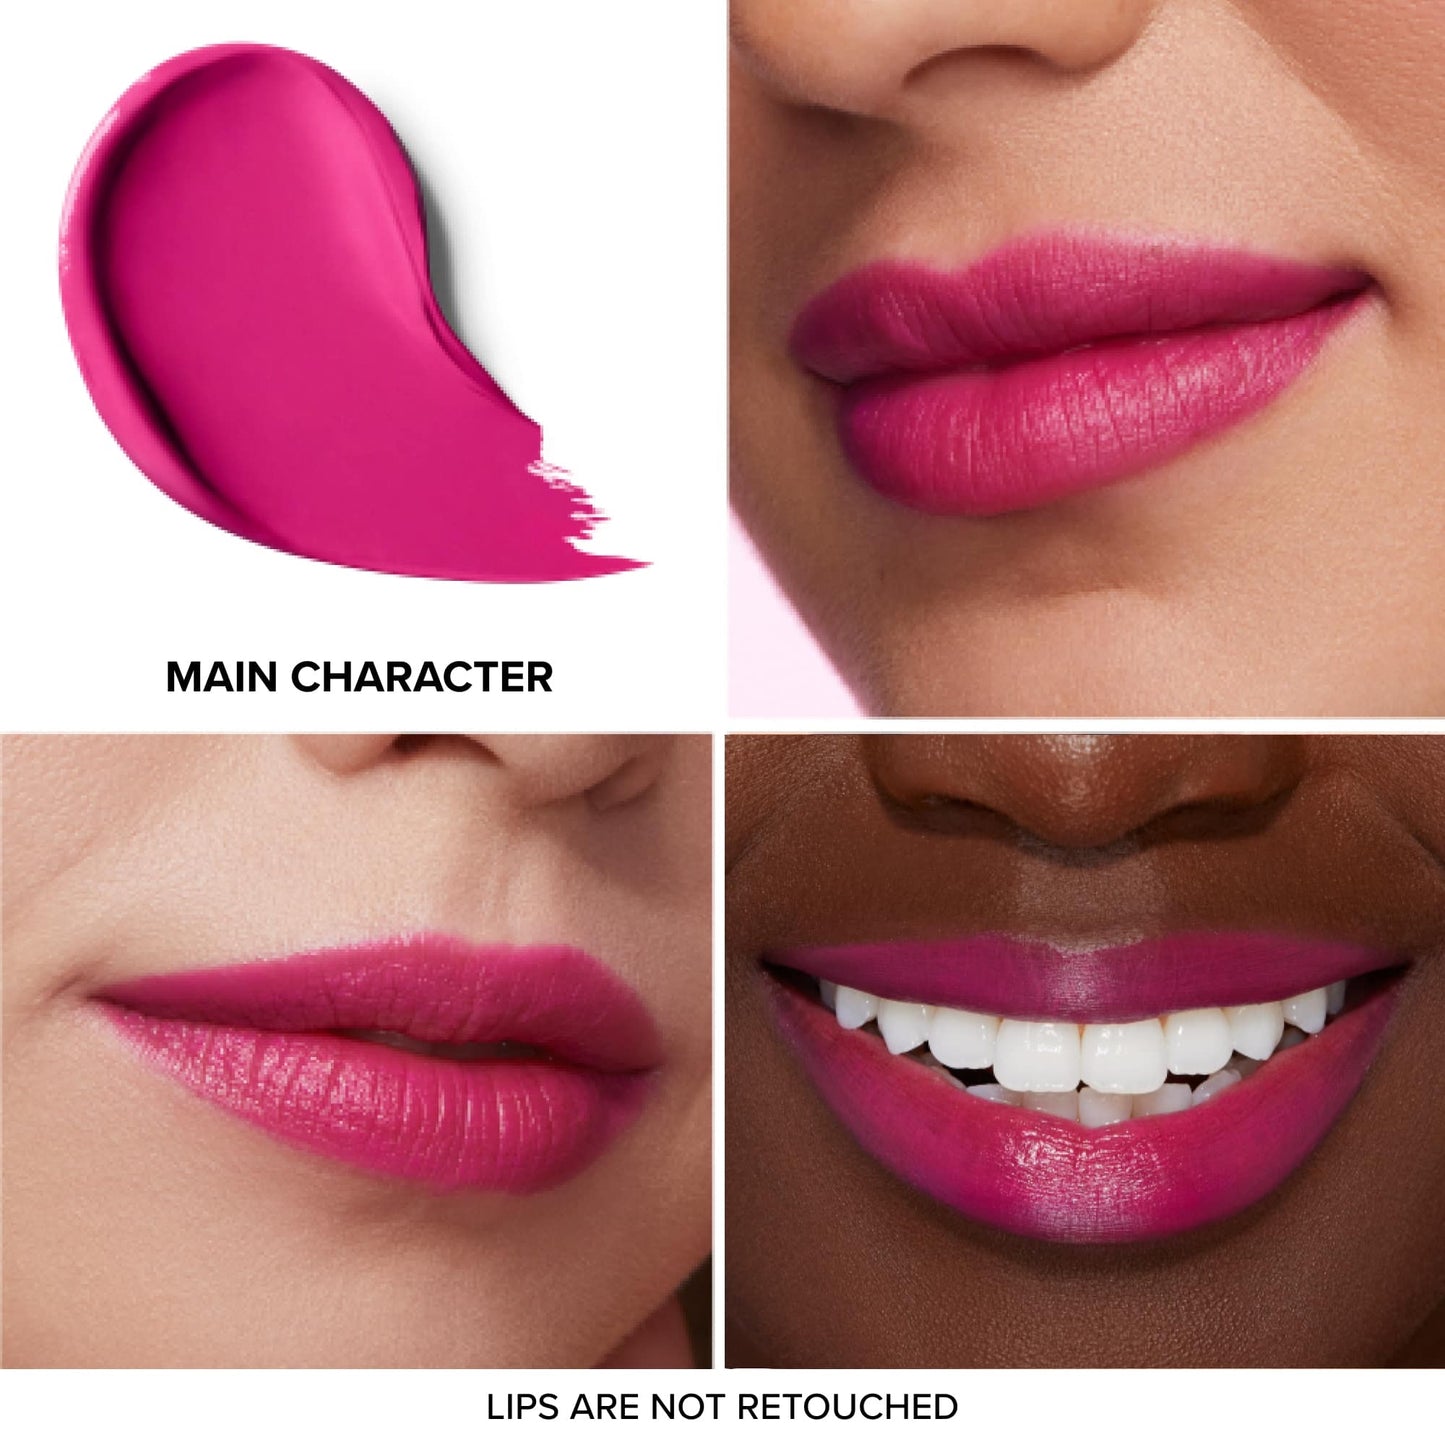 Too Faced Lady Bold Cream Lipstick 4g - Main Character